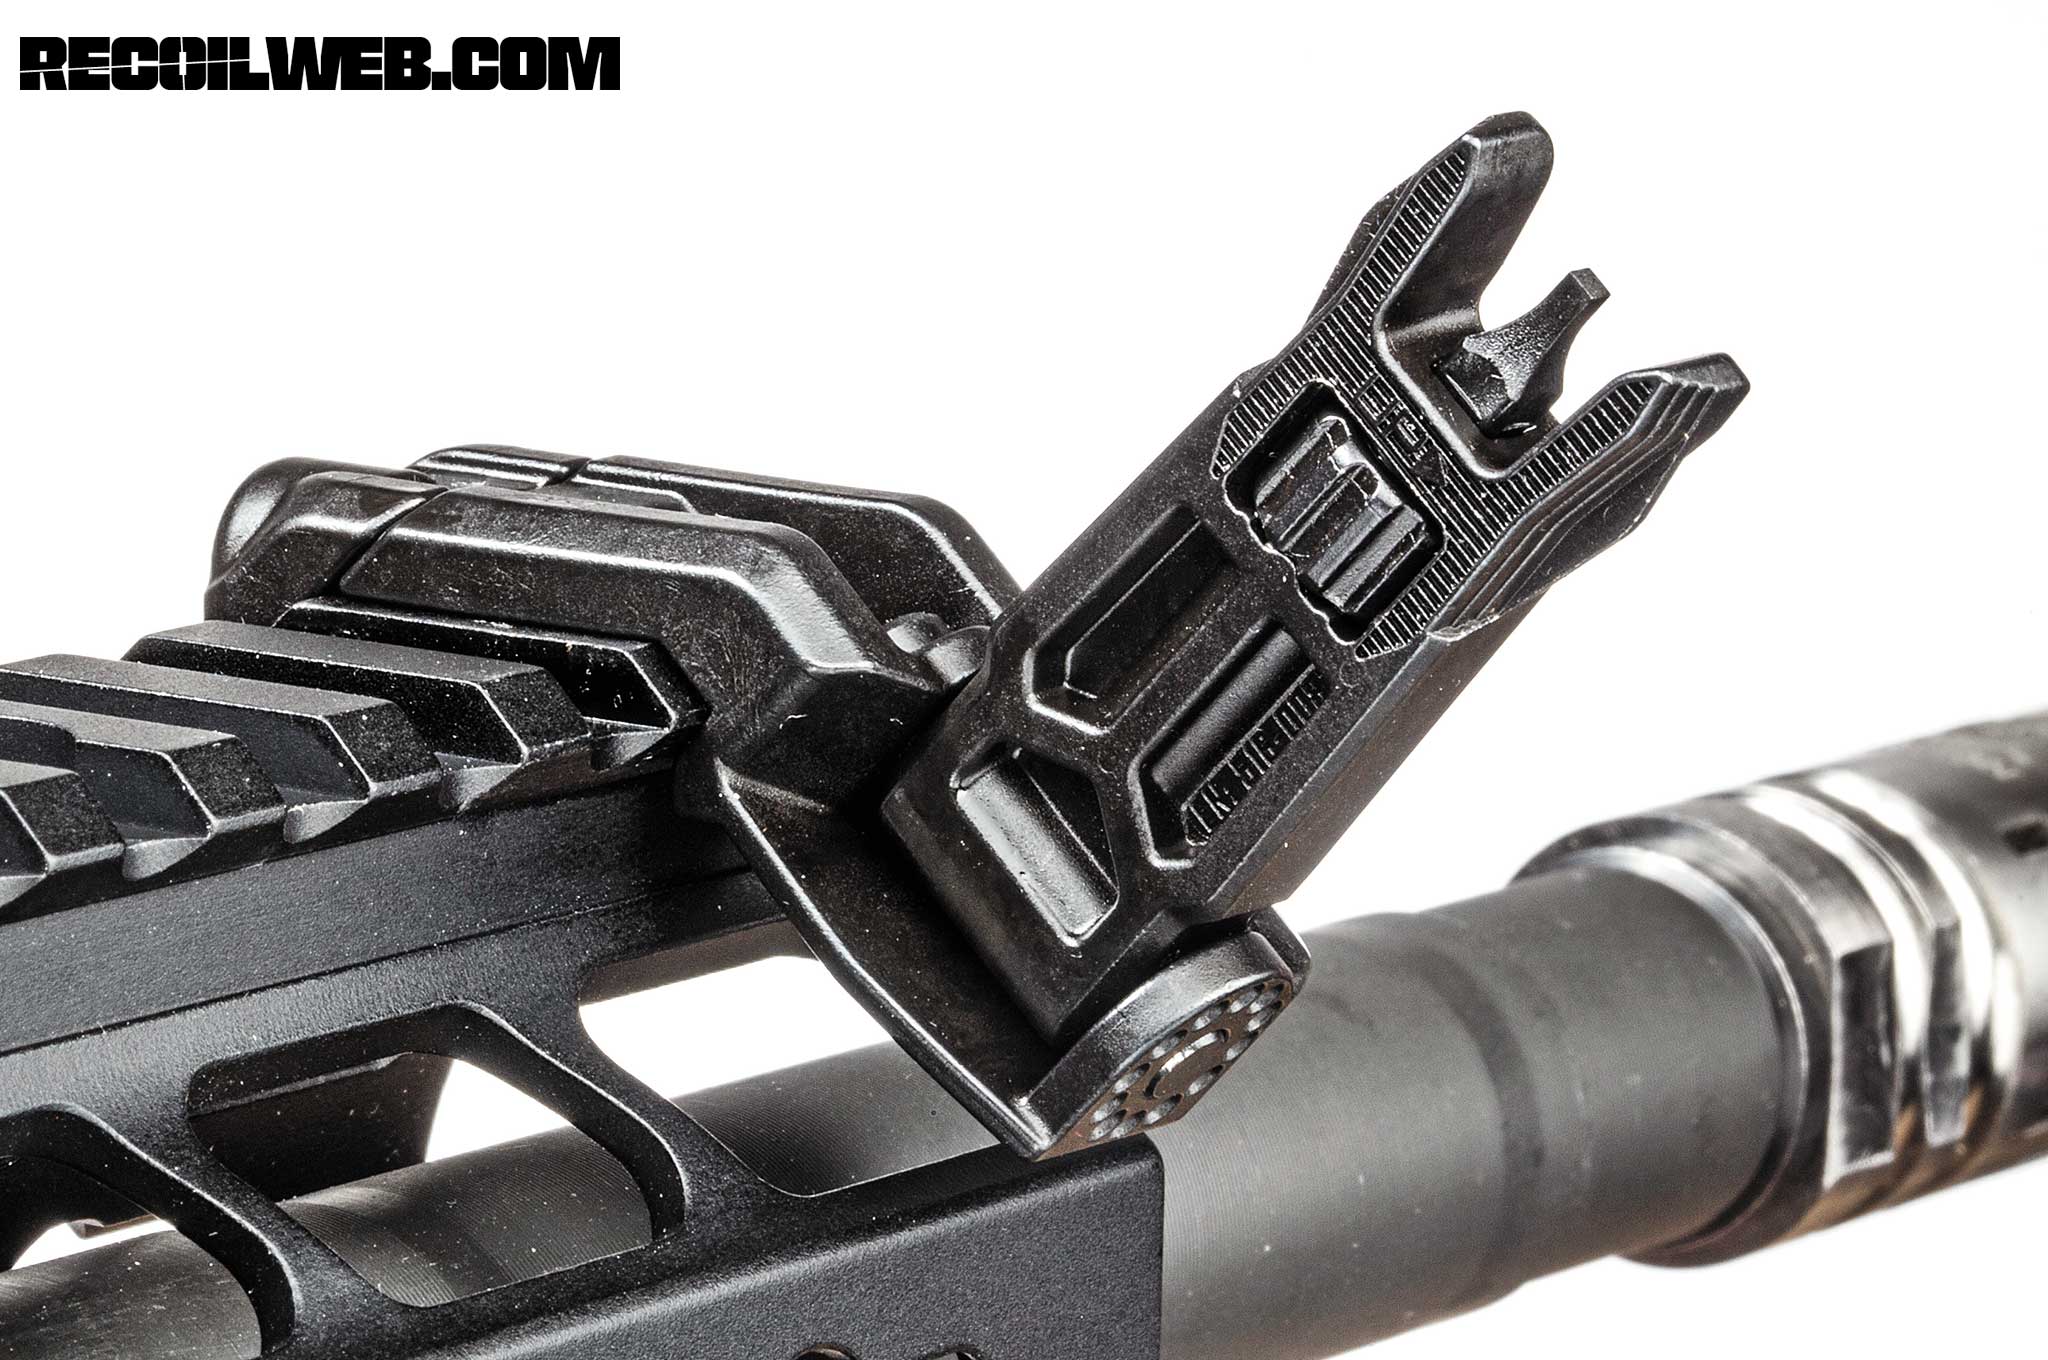 back-up-iron-sights-buyers-guide-magpul-mbus-pro-offset-sights-002.